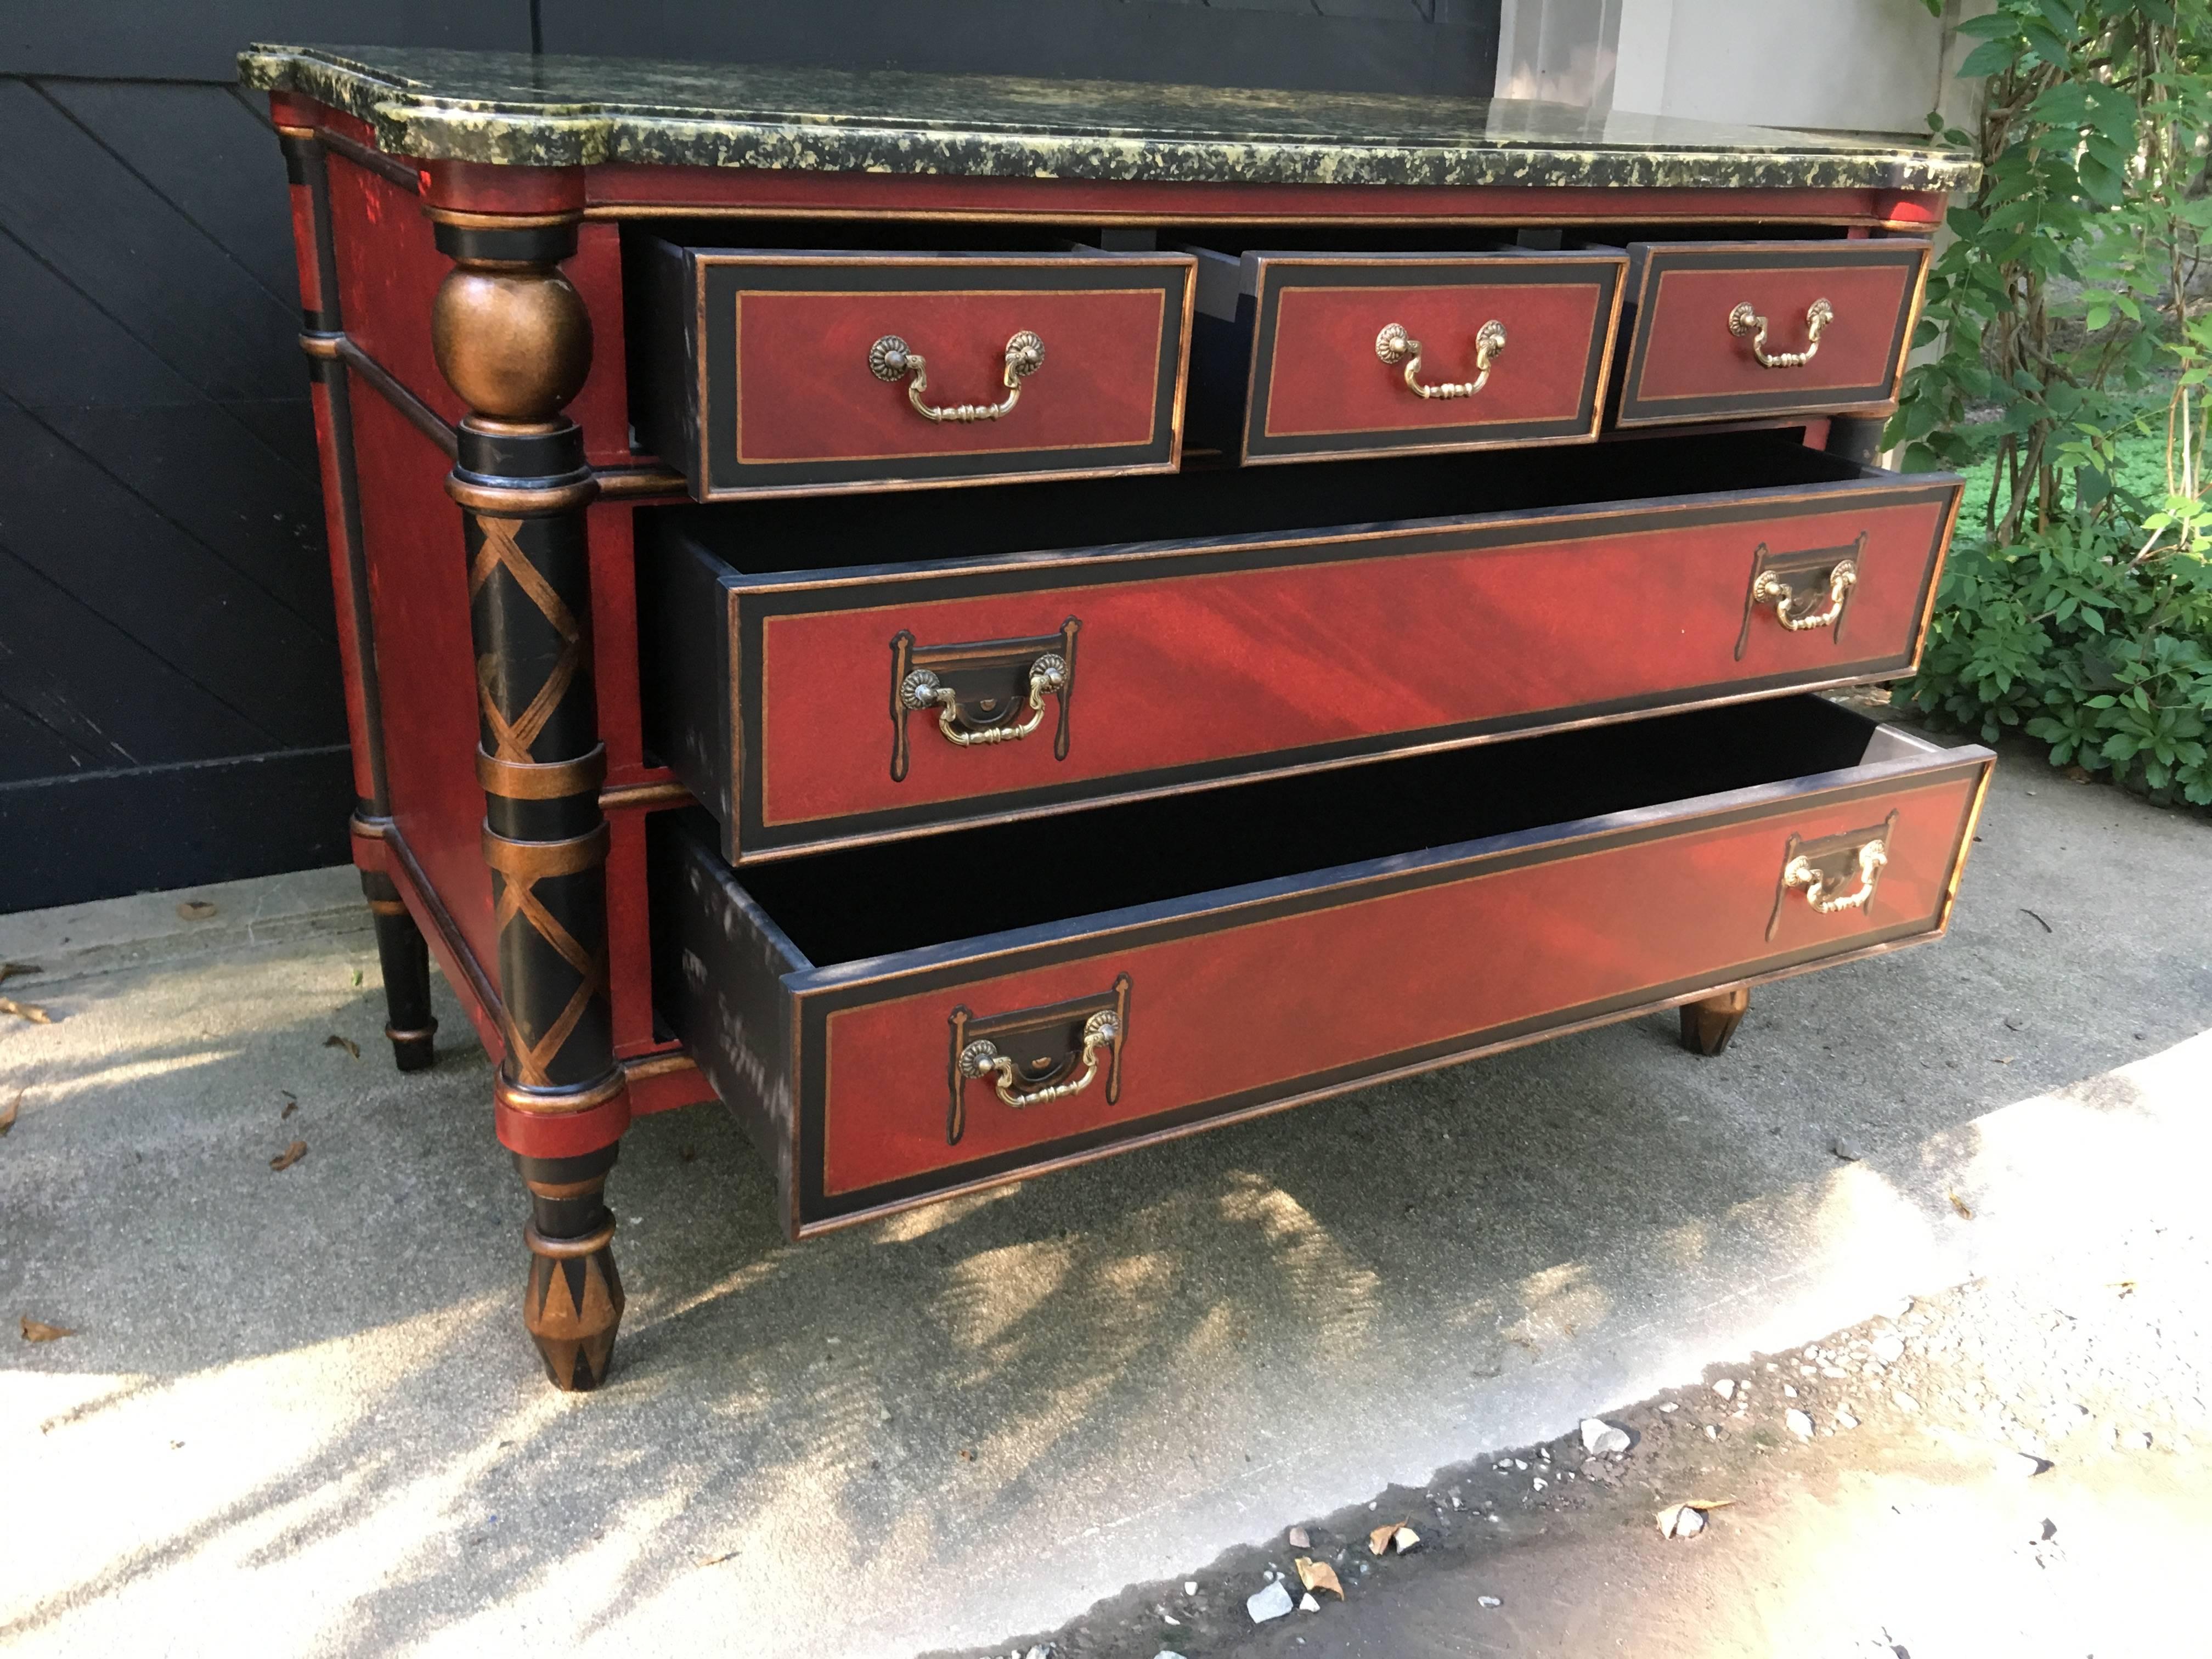 Stunning Regency style chest hand-painted in eye catching Chinese red, black and gold, by Chelsea House. Three small drawers over two full length drawers.